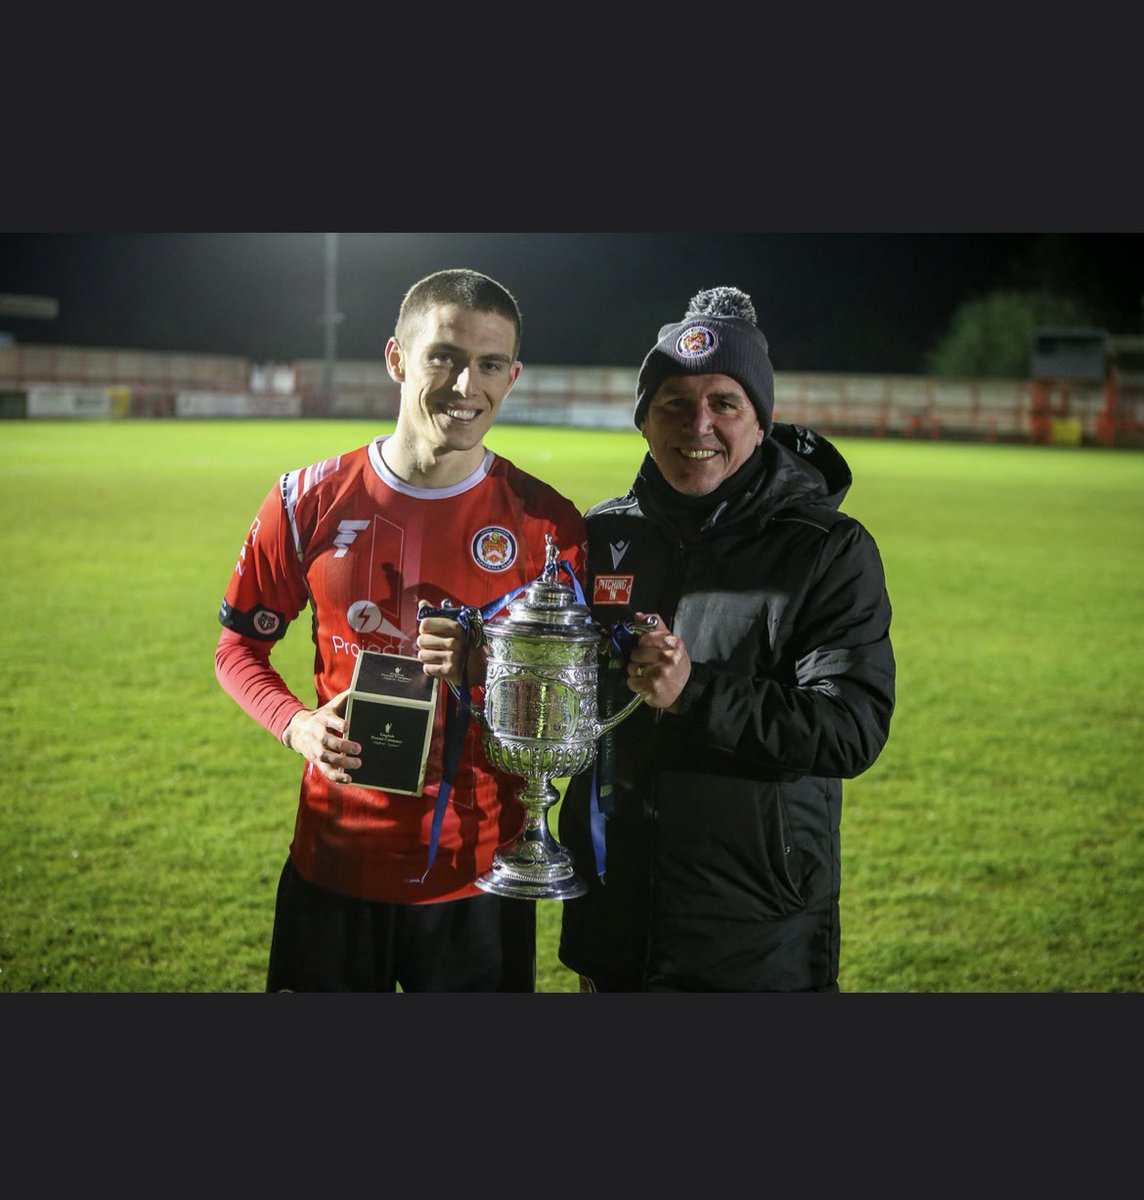 I’d just like to announce that I have left @hydeunited , it’s been a great 2 years & I’d like to thank everyone associated with the club. It has been brilliant to share this experience with my dad, but it is now time to move on and play at the highest level possible ⚽️❤️ Cal